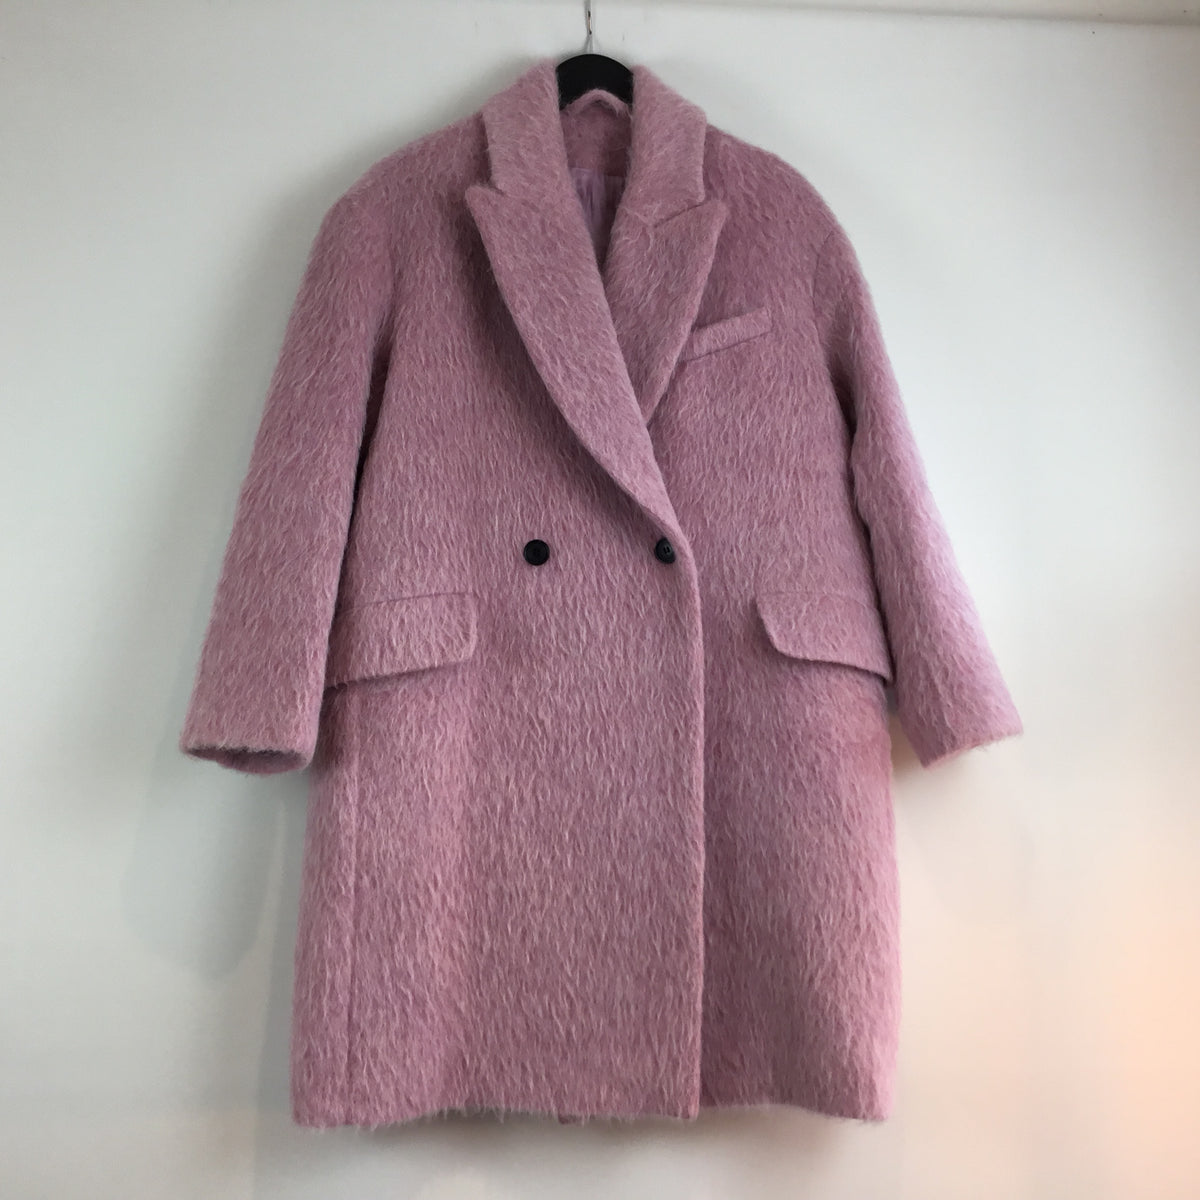 & Other Stories brushed wool coat Pink Size 8